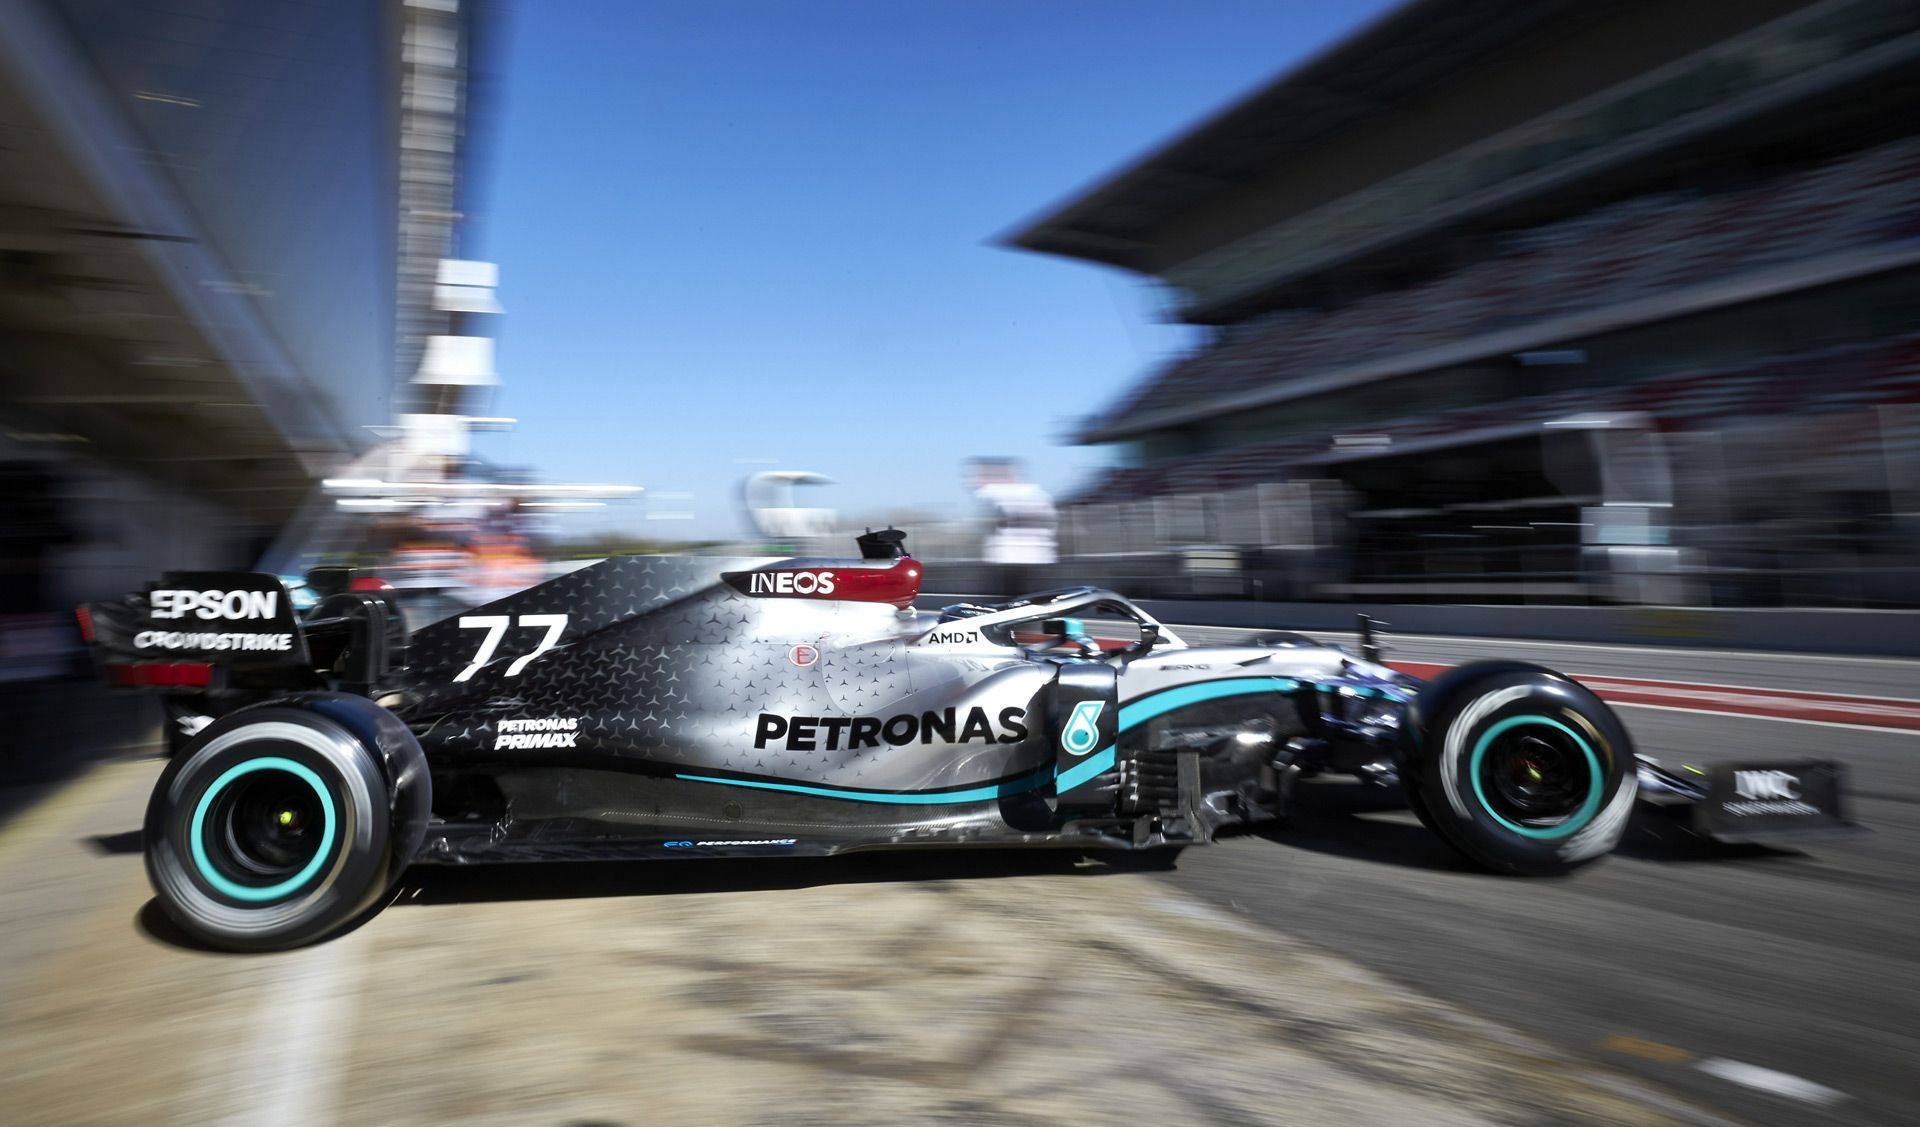 New Dual Axis Steering On Mercedes AMG's F1 Car Already Banned